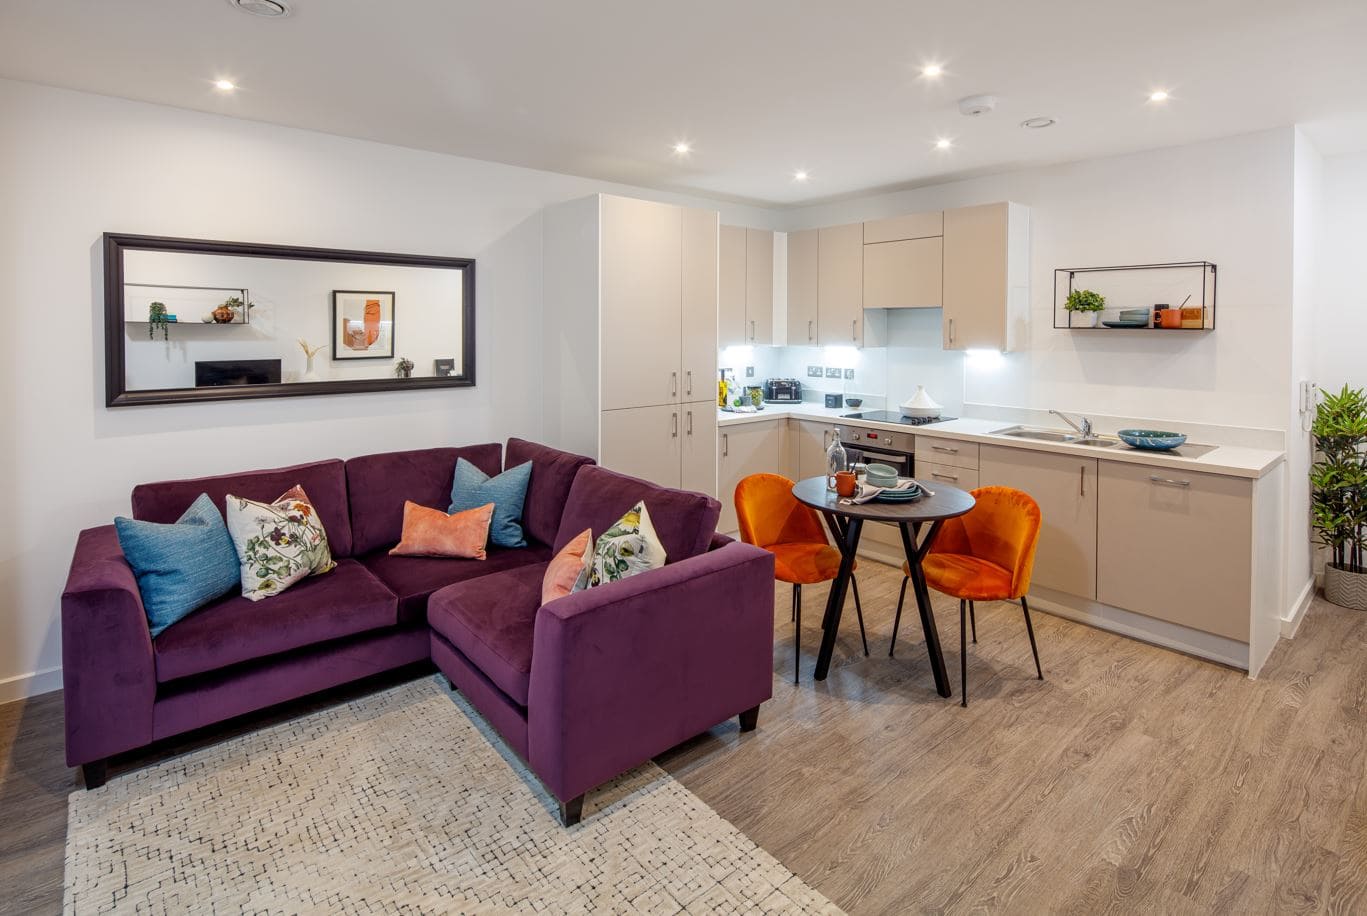 Internal photography of L&Q at Ridgeway Views - Shared Ownership homes available on Share to Buy